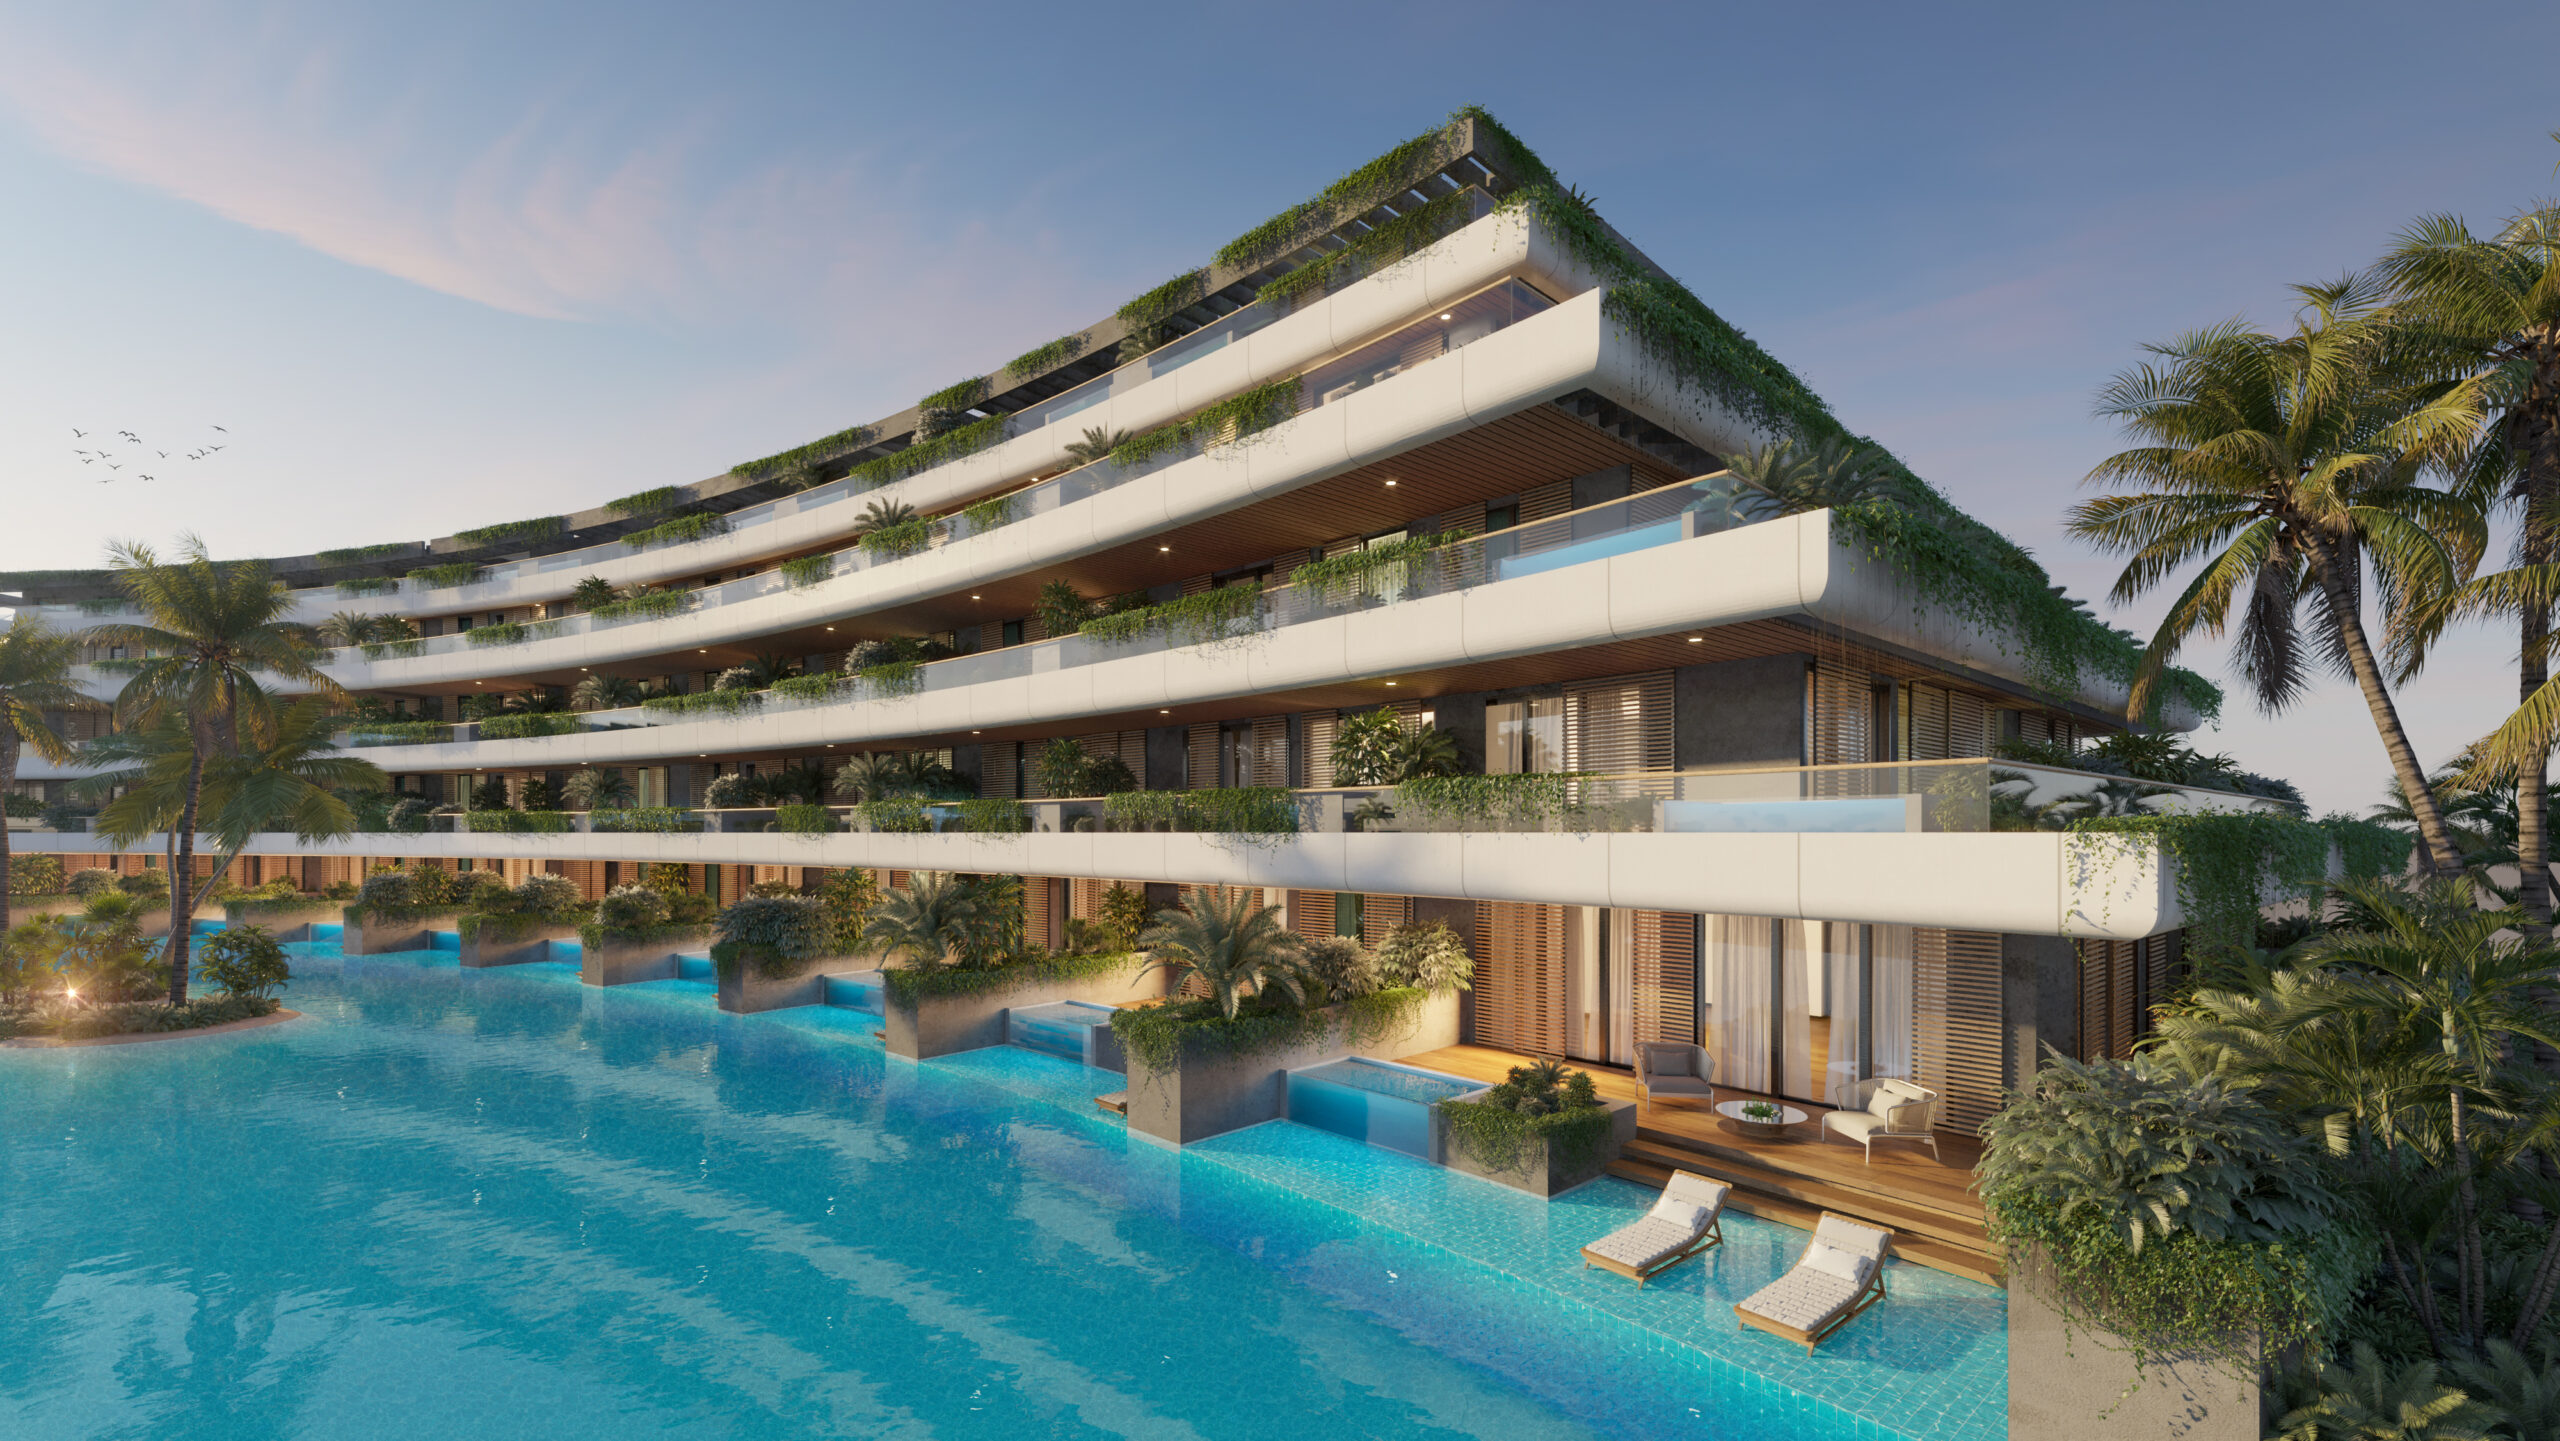 Luxurious condominium with the biggest pool in the caribbean E-101